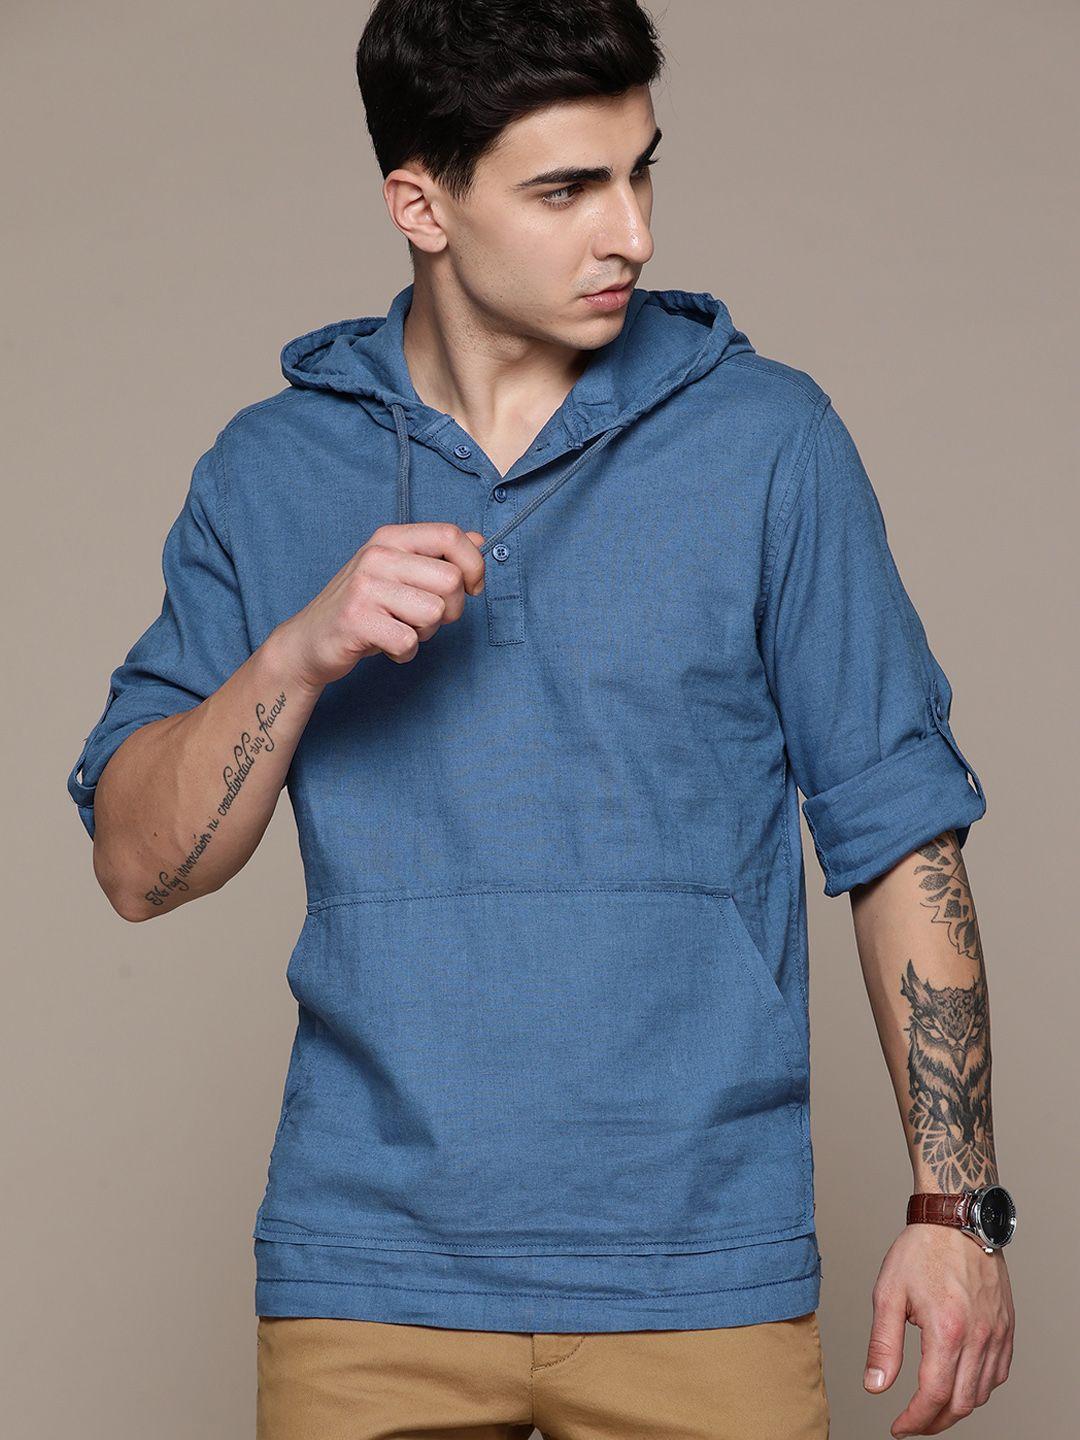 the roadster lifestyle co. hooded relaxed fit casual shirt